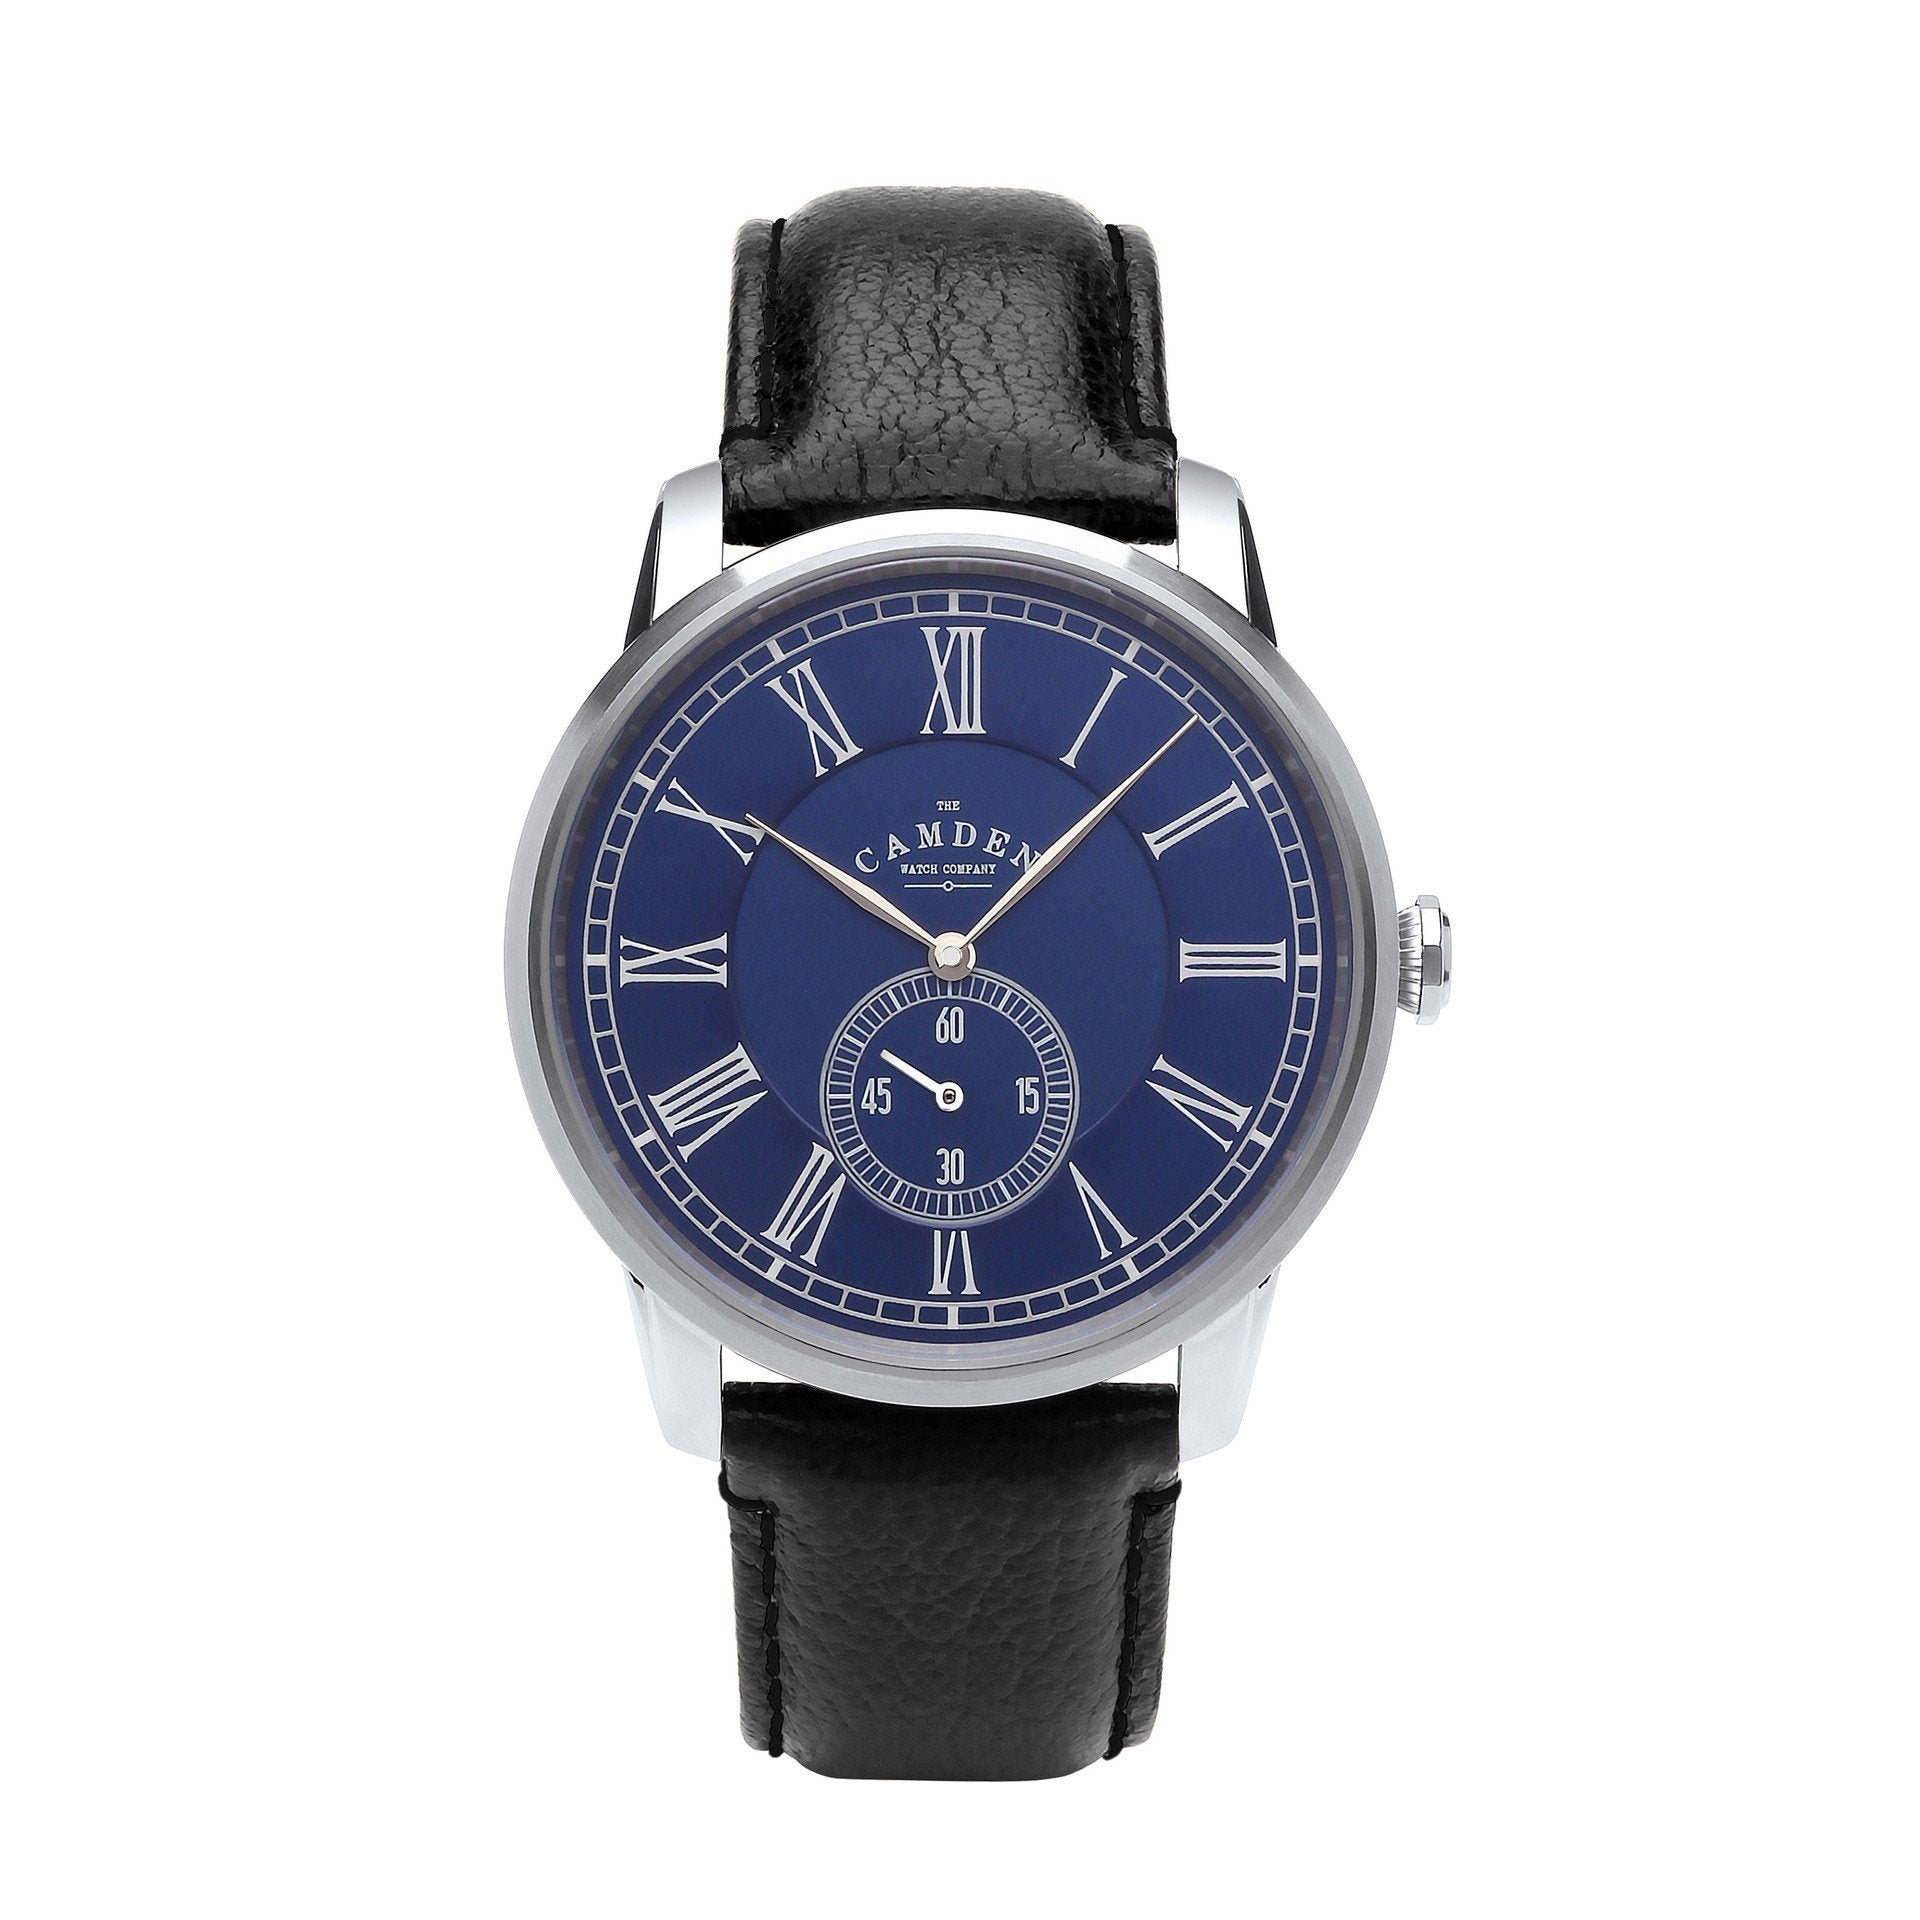 Gents Classic British Watch with Black Strap and Blue Face